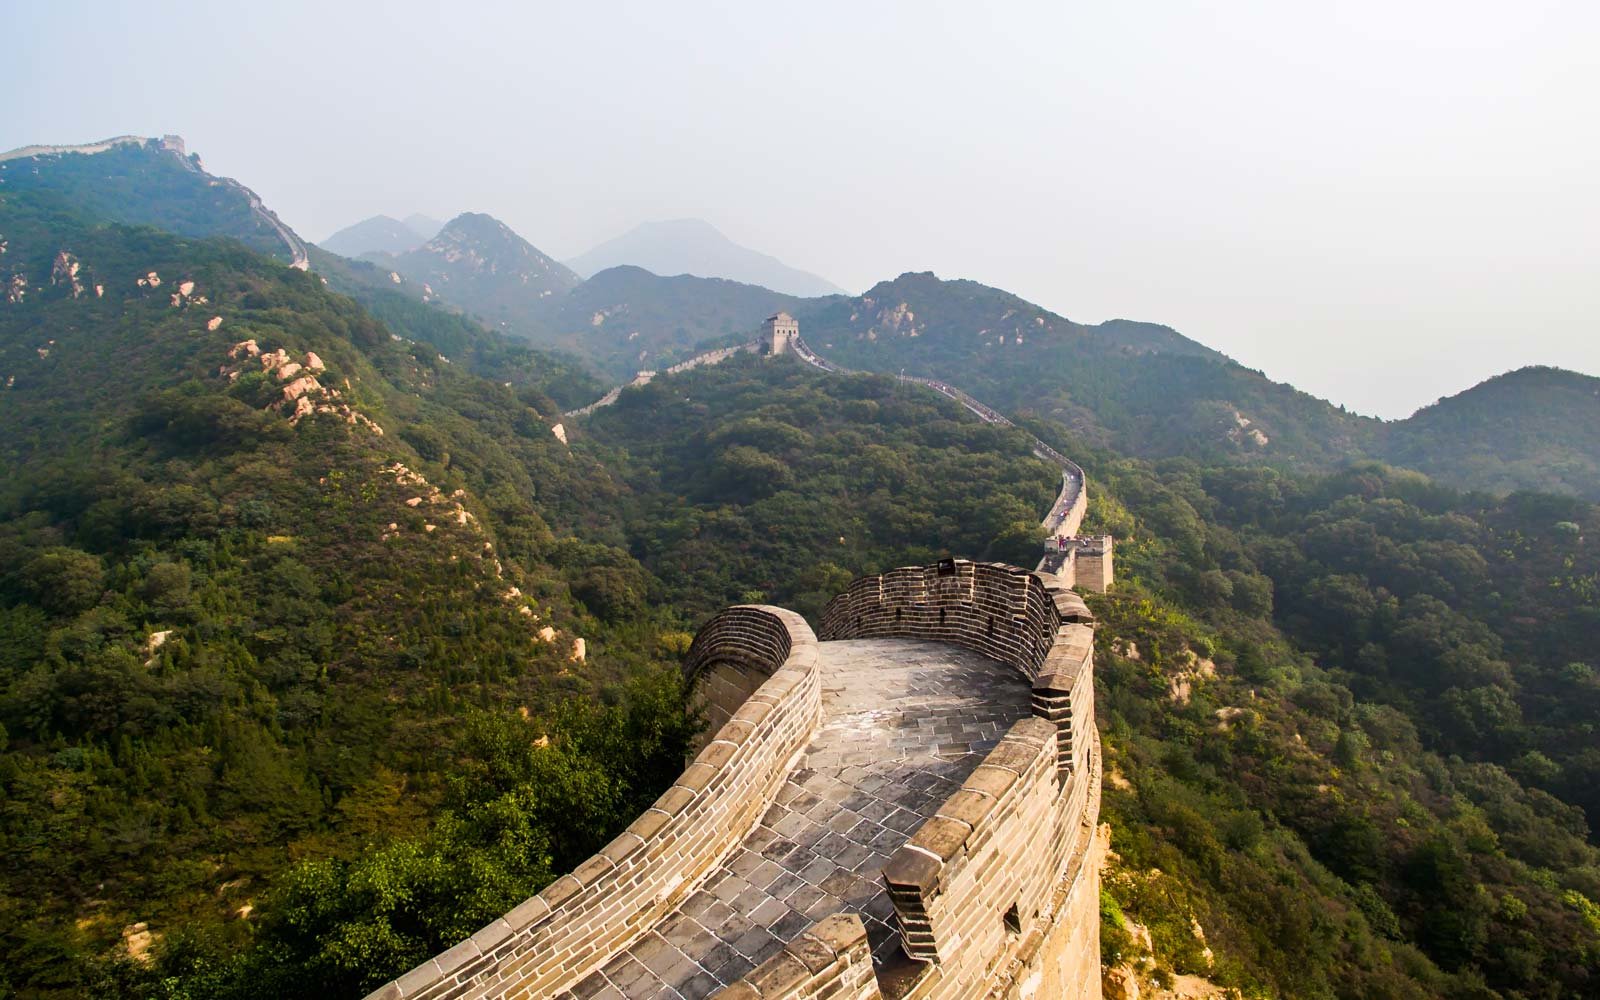 The Hardest General Knowledge True/False Quiz You’ll Take This Year The Great Wall Of China